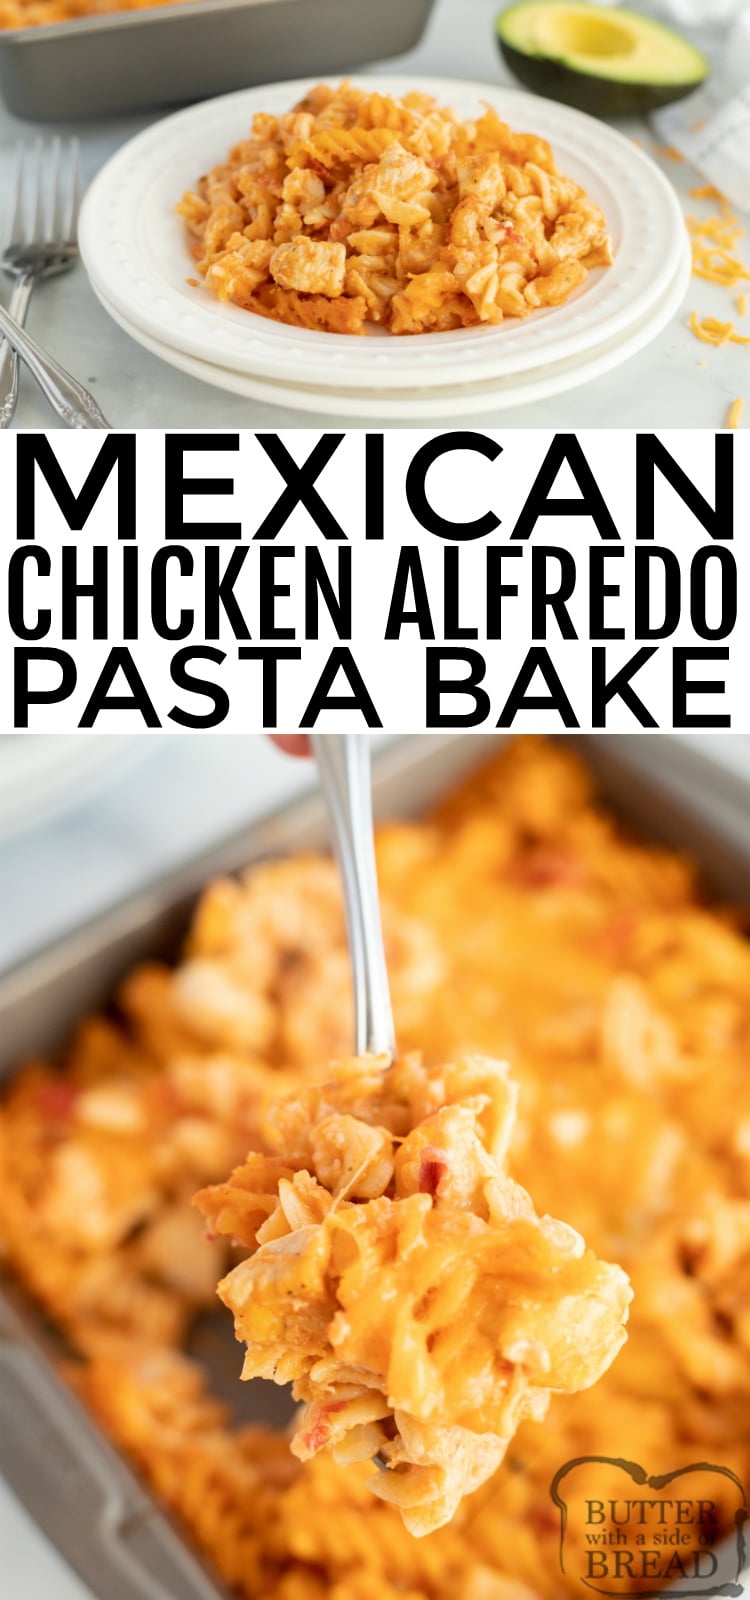 Mexican Chicken Alfredo Pasta Bake is a quick and easy dinner recipe that adds a southwestern twist to chicken alfredo. This baked alfredo recipe includes chicken, alfredo sauce, salsa, taco seasoning and lots of cheese!